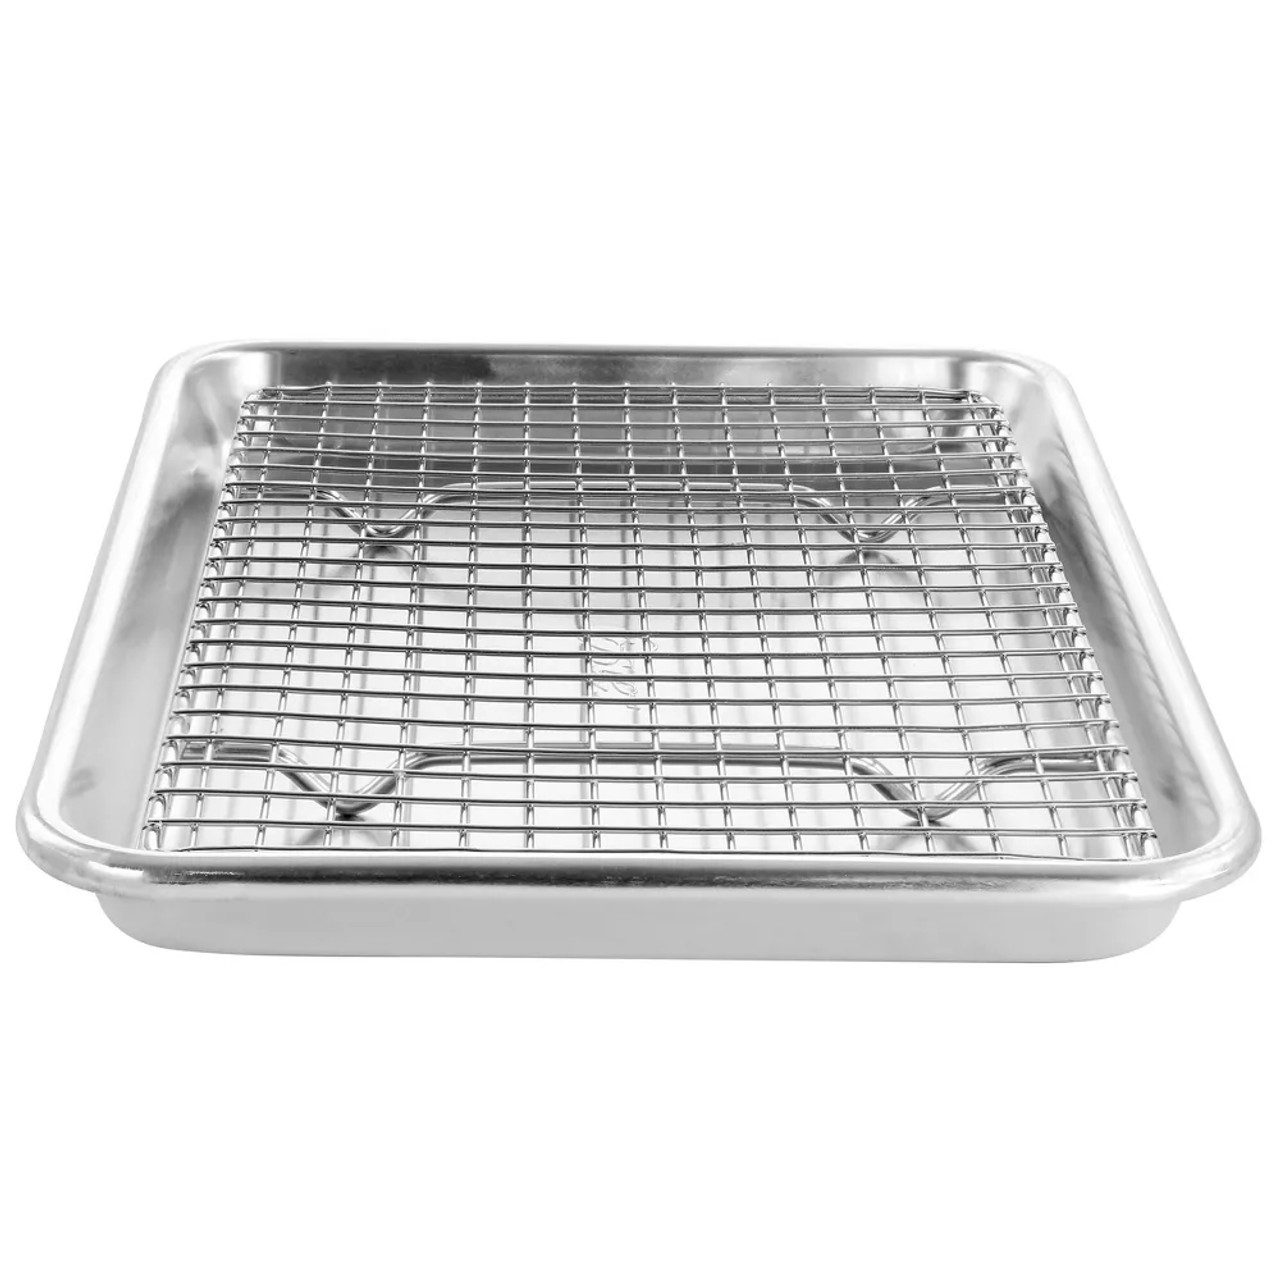 https://cdn11.bigcommerce.com/s-bjqt1yp5q3/images/stencil/1280x1280/products/7967/29425/Oster_13_in_Baking_Sheet_with_Cooling_Rack_4__48729.1690141165.jpg?c=1